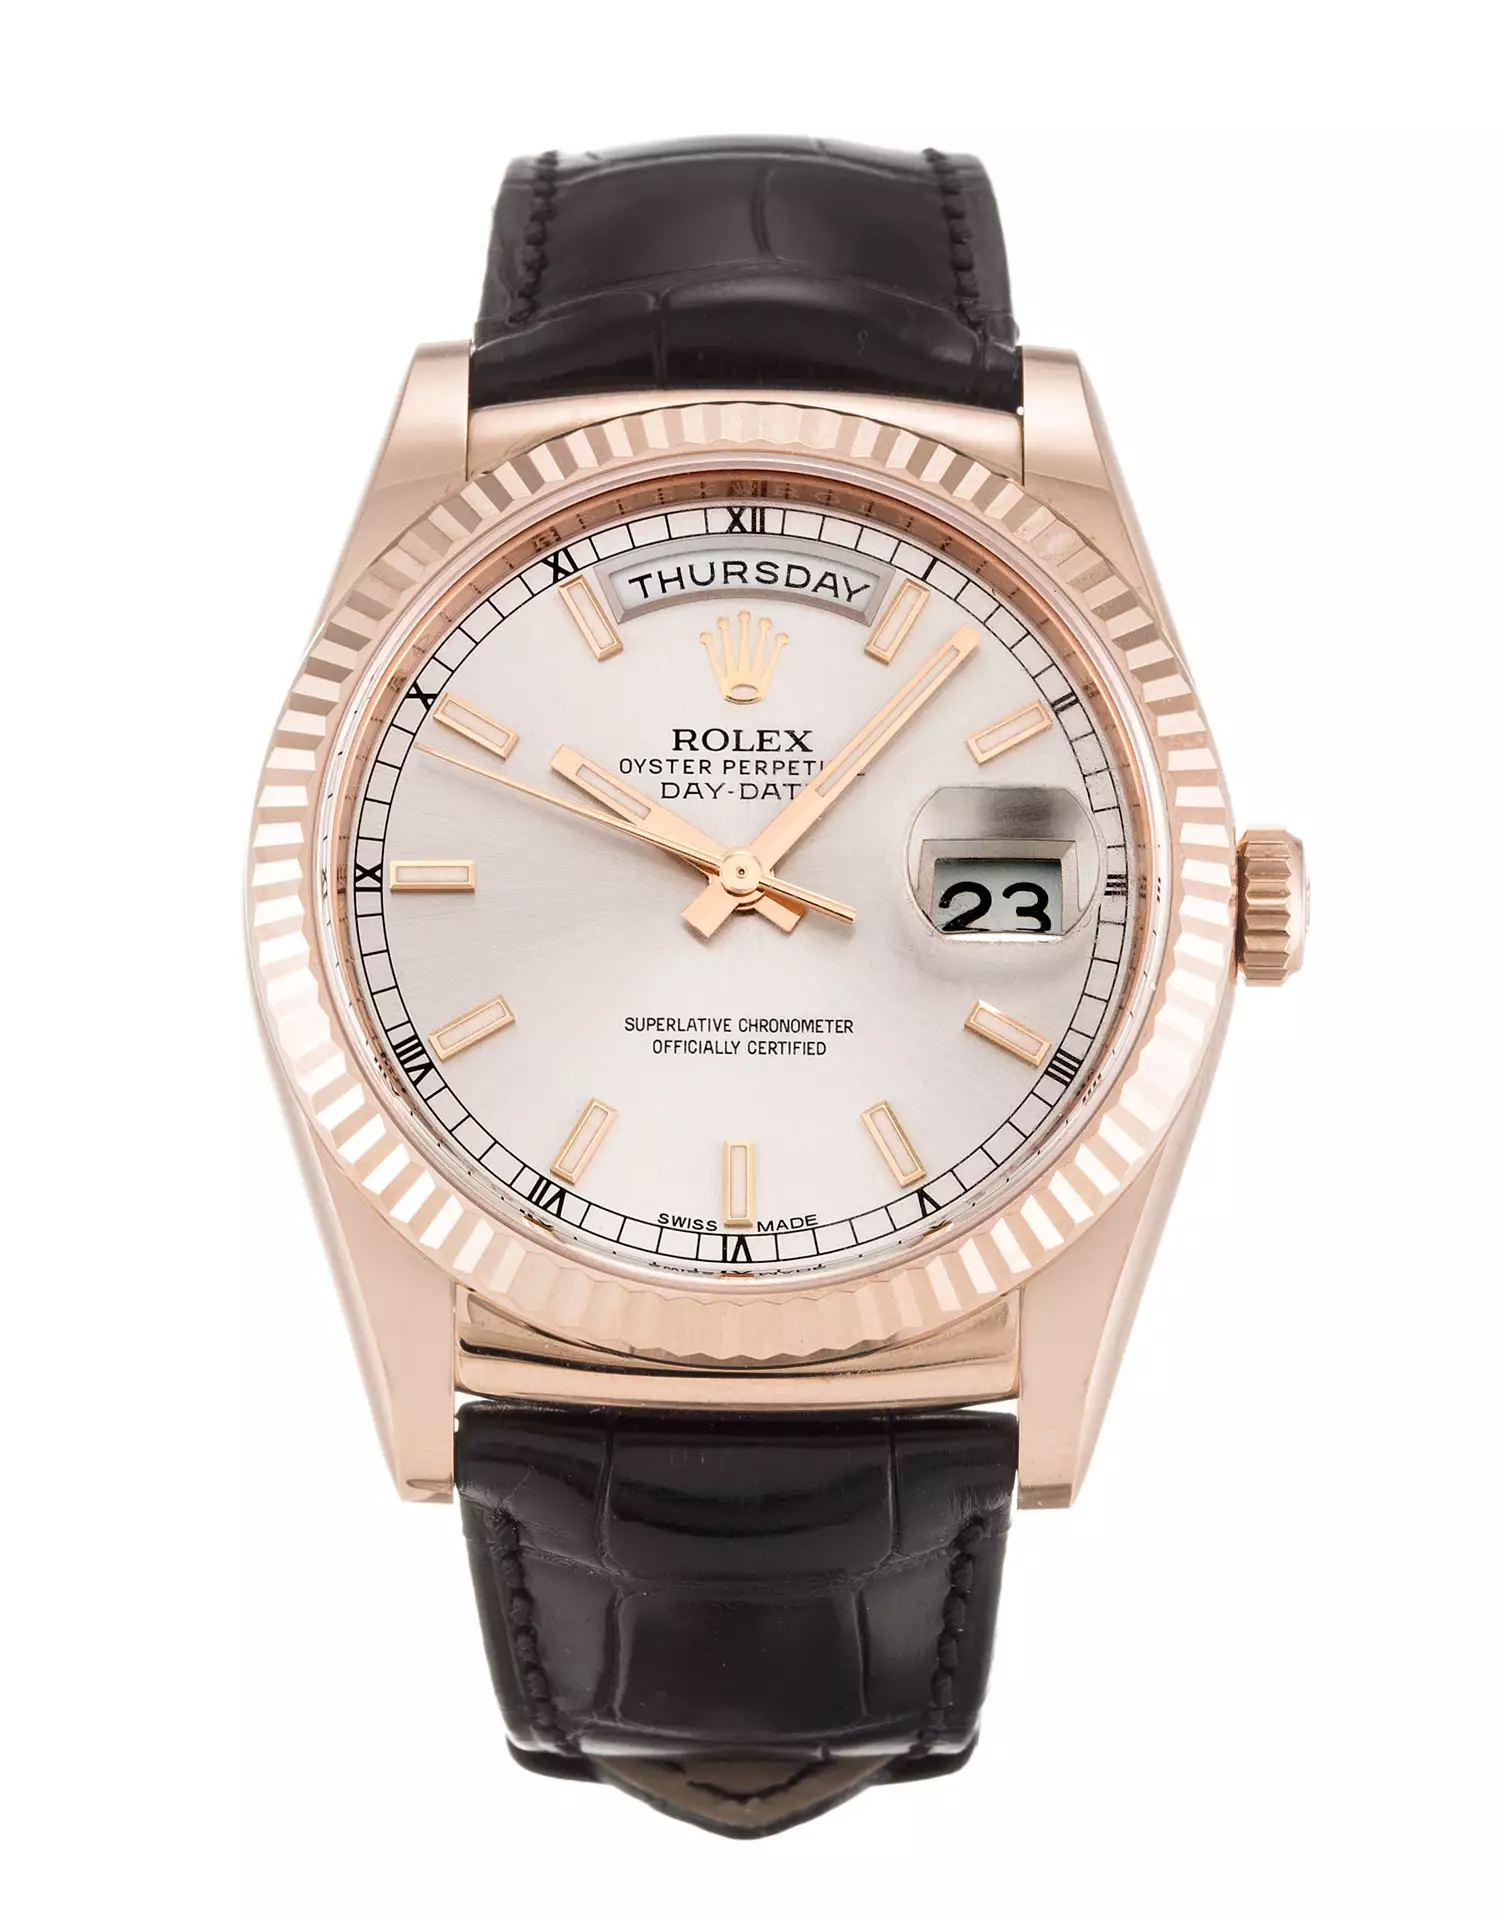 Rolex Day-Date 18k Rose Gold Brown Dial 